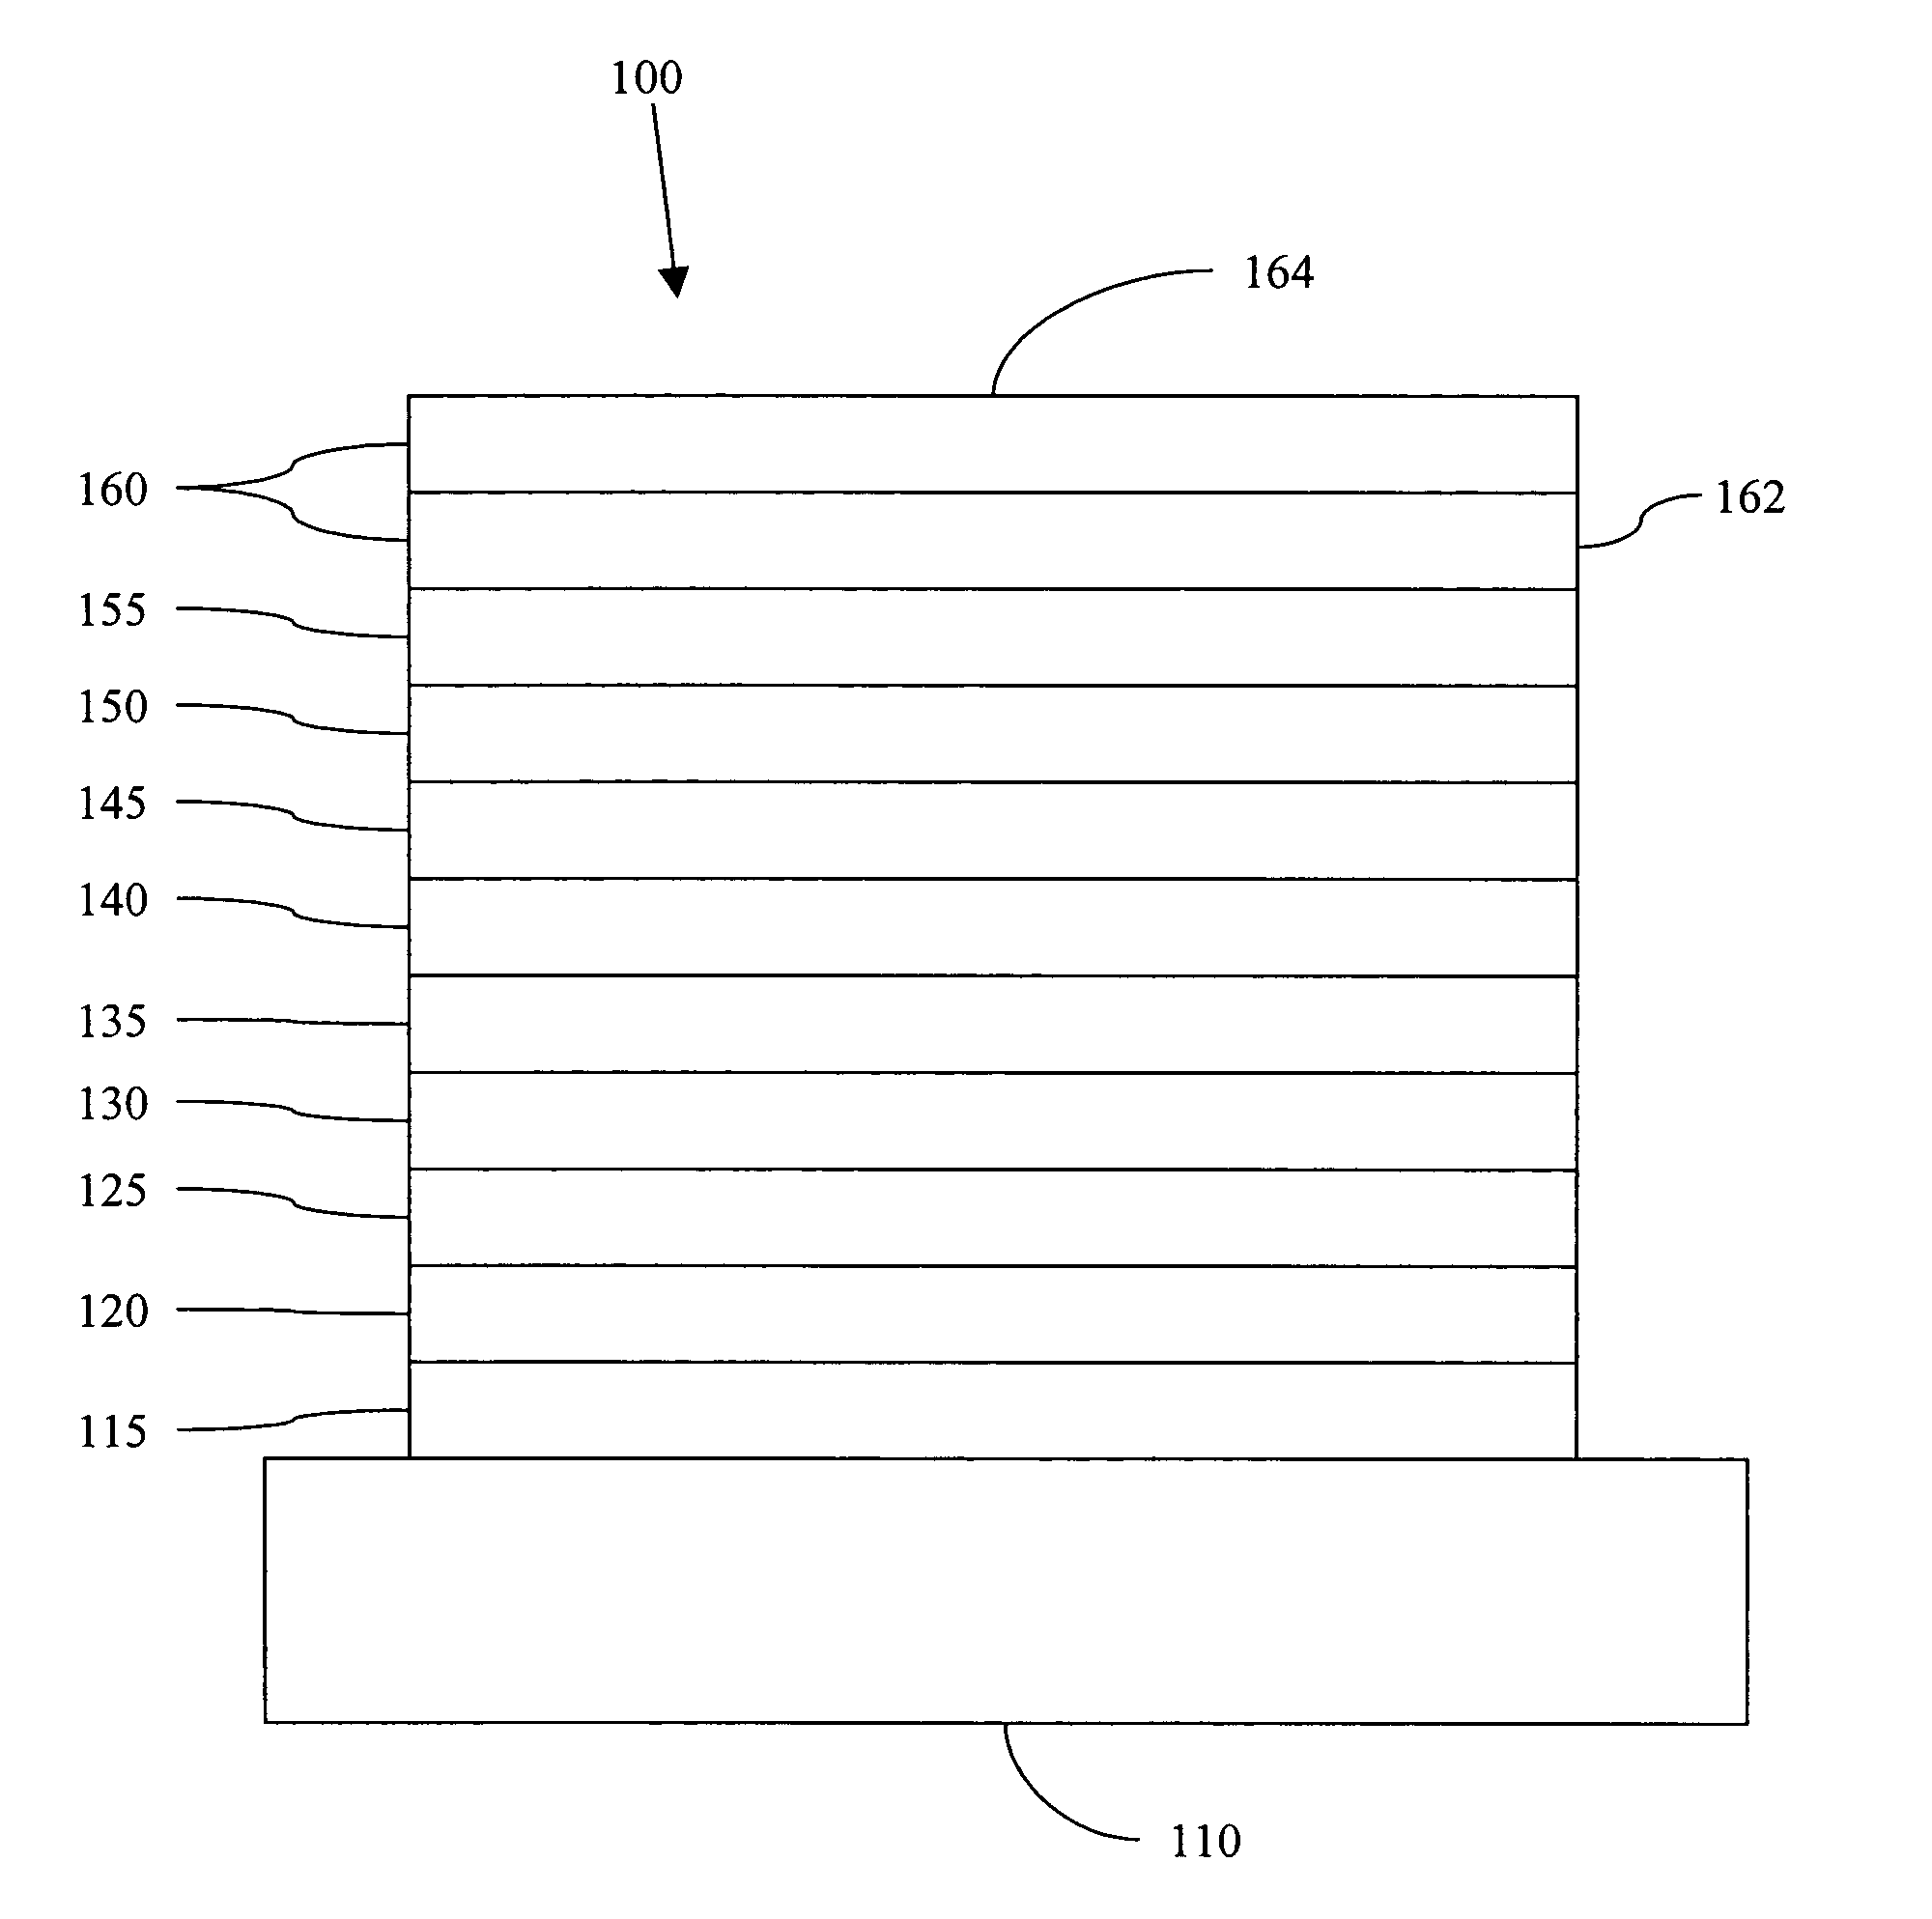 Organic light emitting device structure for obtaining chromaticity stability